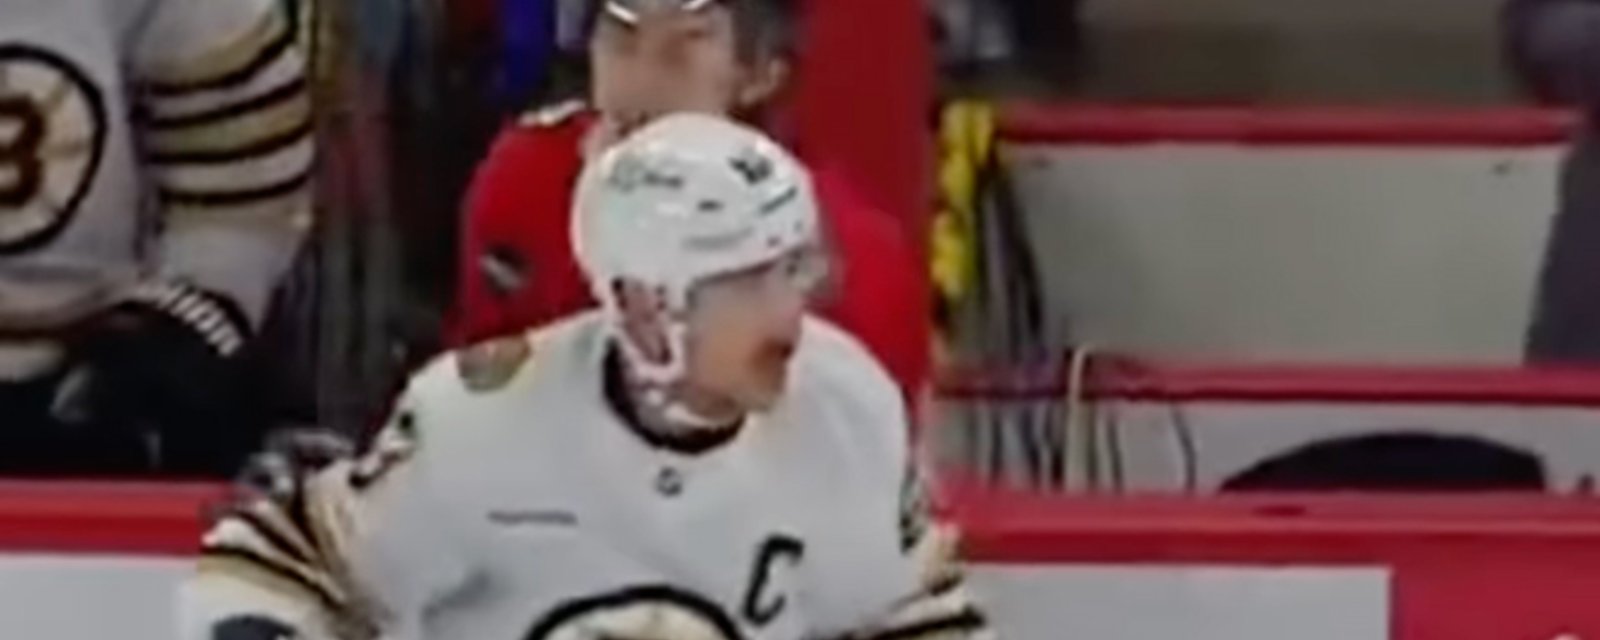 Brad Marchand goes after Connor Bedard again in Bruins-Hawks 2nd game of the season